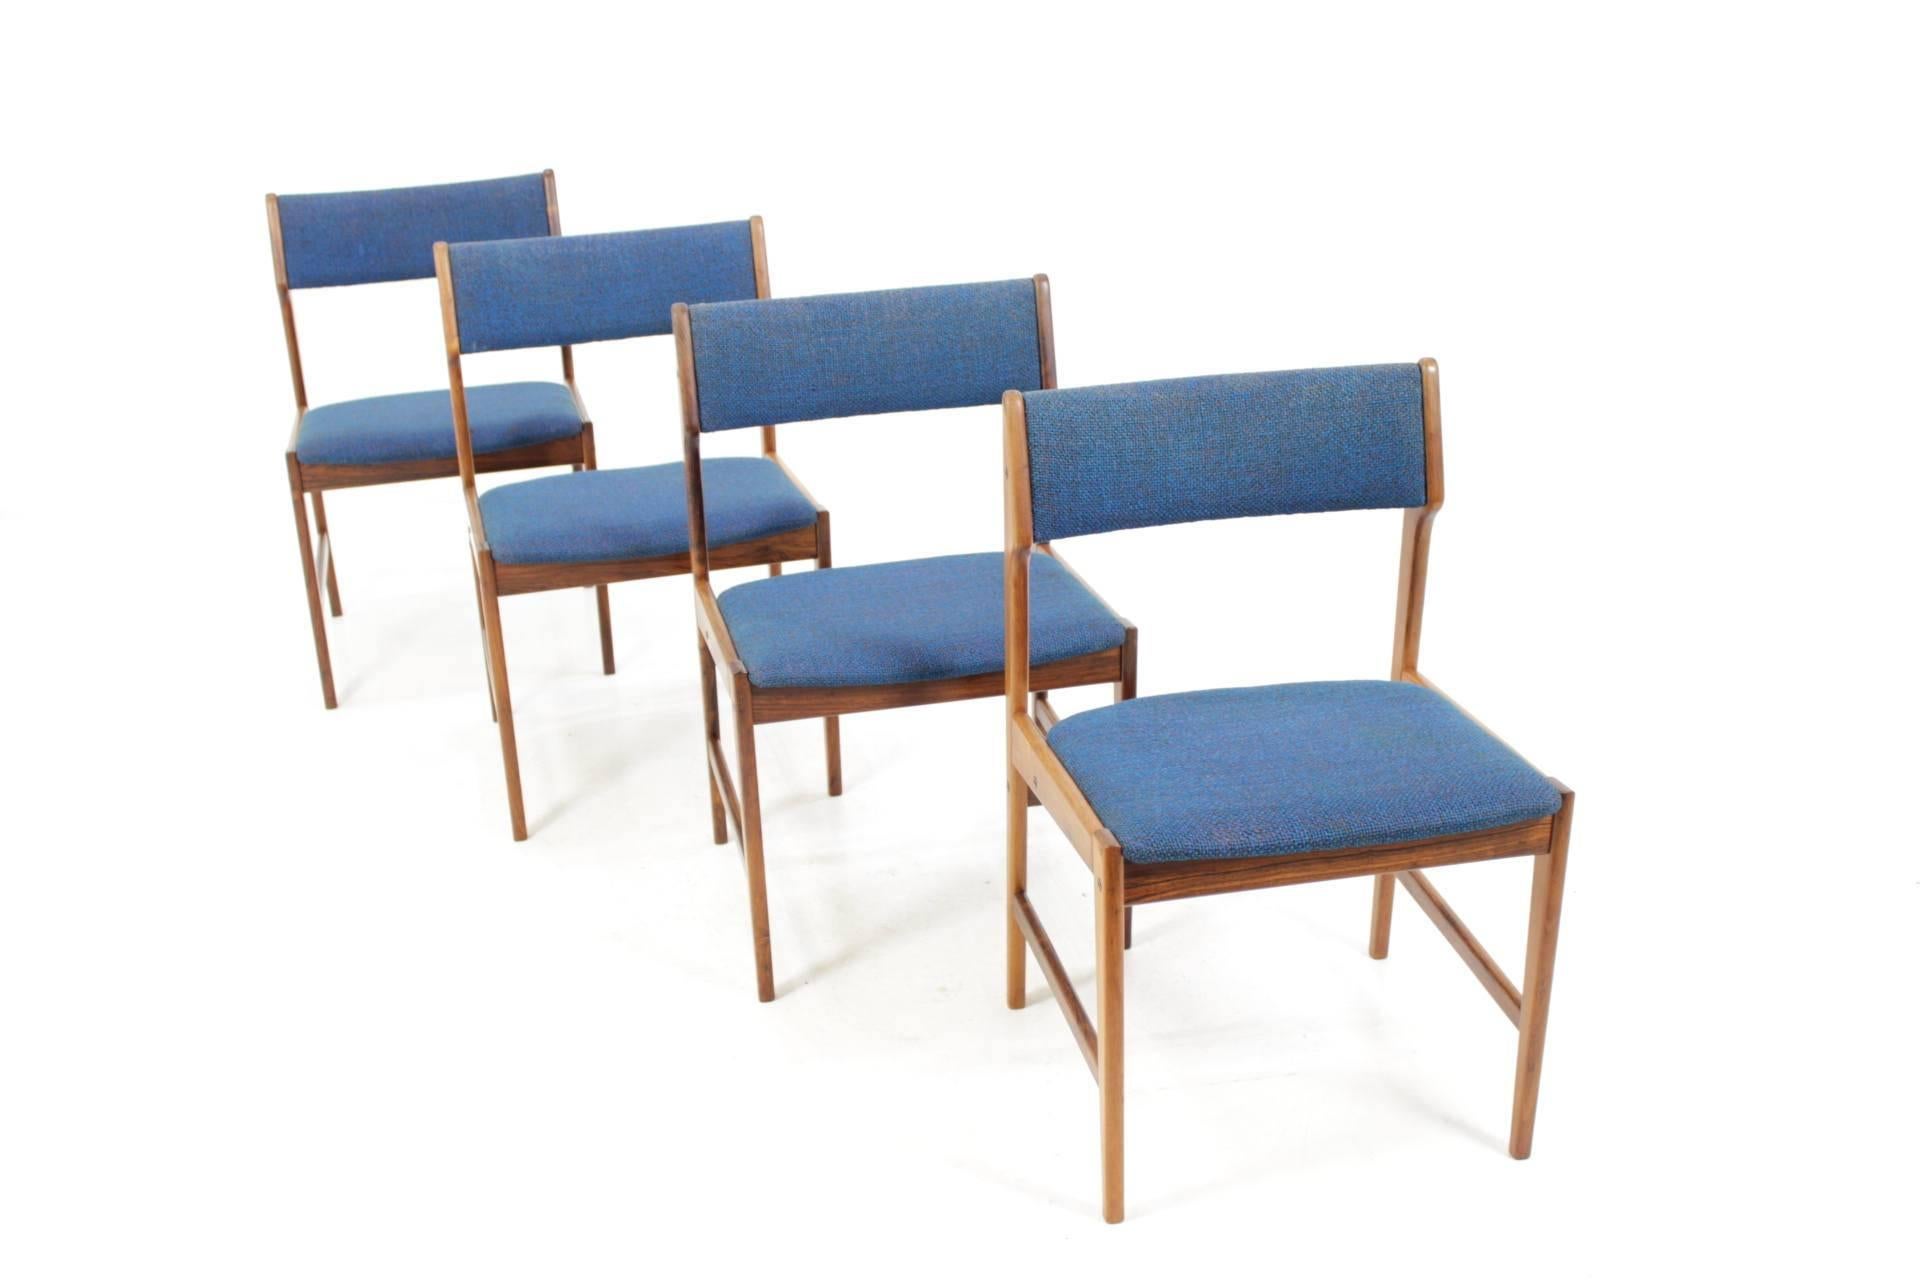 The frame of each one is made from massiv palisander wood and has been re-polished .The originally upholstered seats and backrests are in good condition. Some signs of wear due to age 
labeled by manufacturer: BRDR ANDERSEN VEJEN.